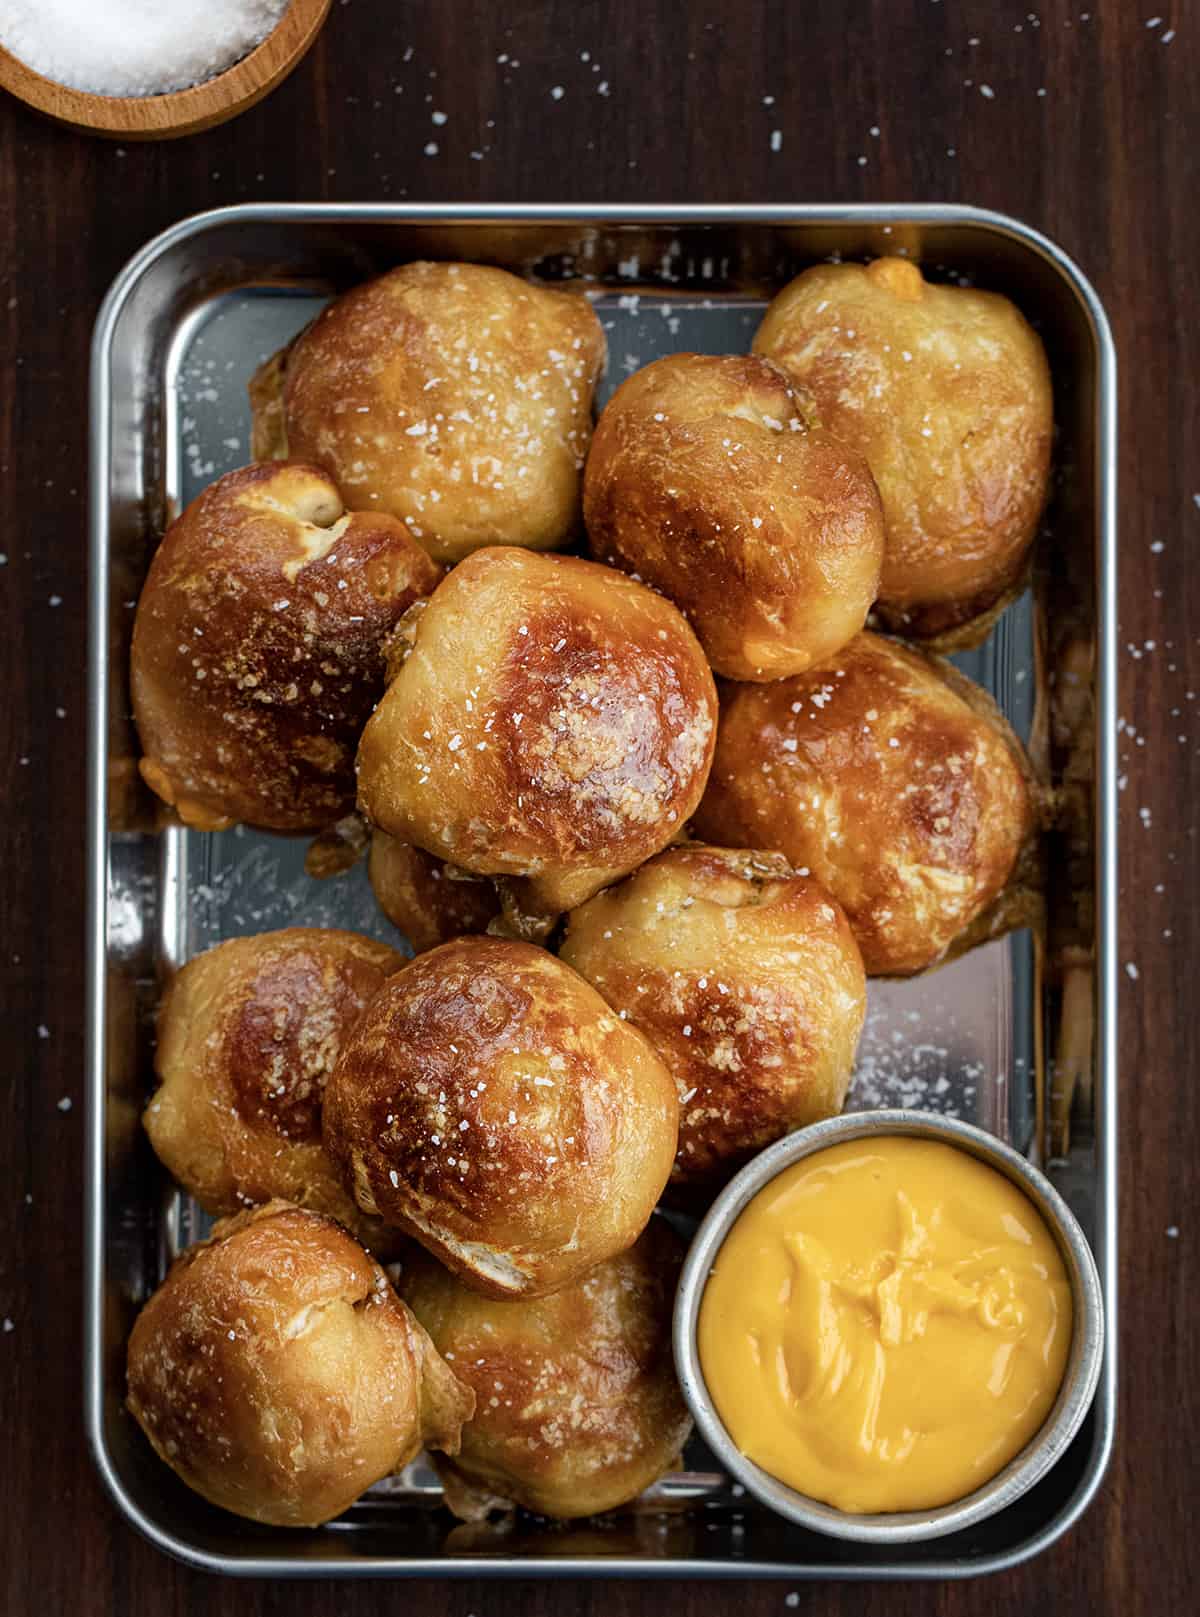 Pan of Cheese Stuffed Pretzel Bombs from Overhead with Side of Cheese.